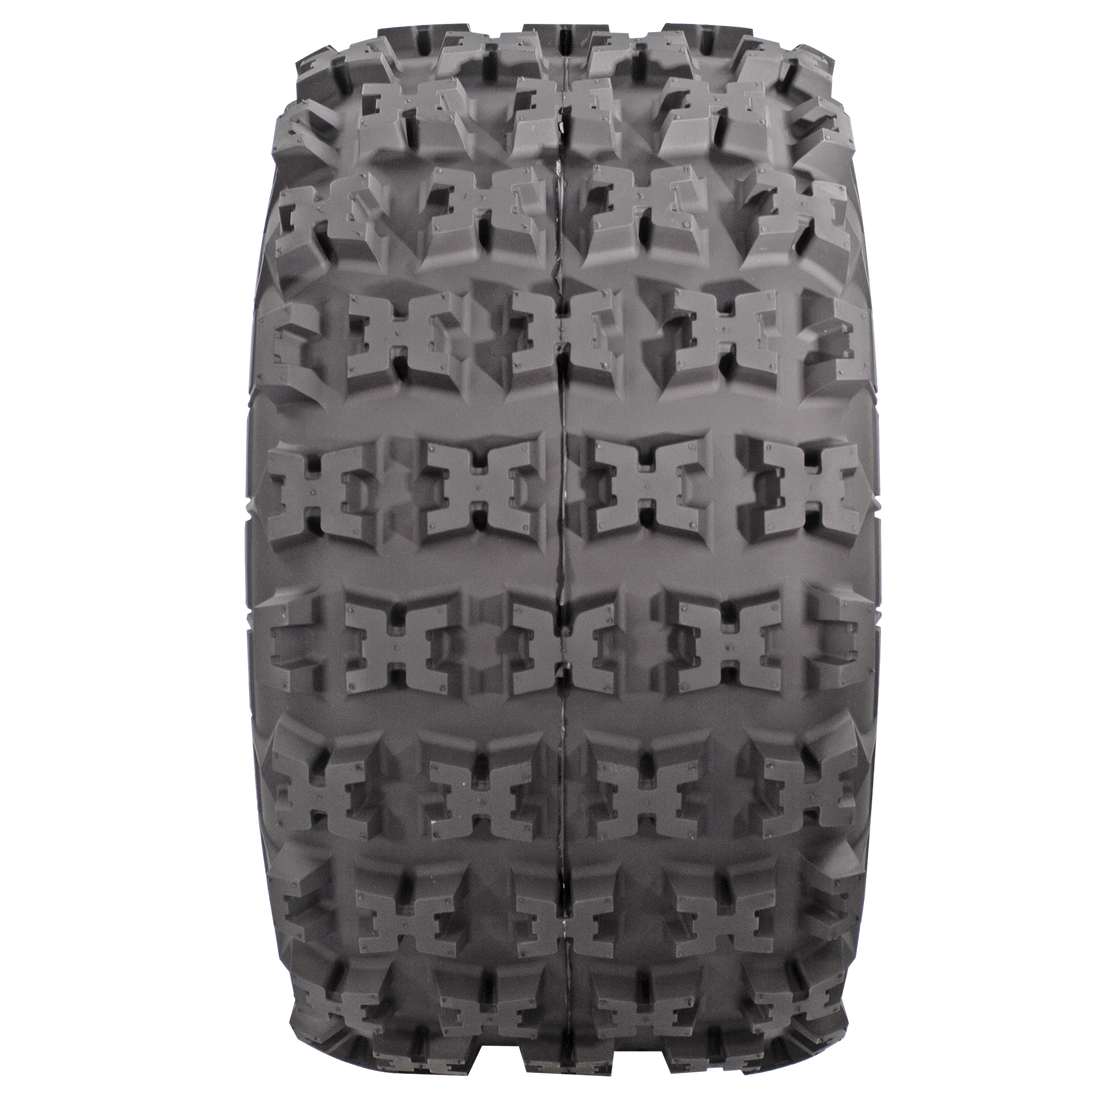 Full frontal view of XC-Master ATV tire, revealing its full-coverage X-type lug tread pattern, which enhances traction and stability during adventurous rides